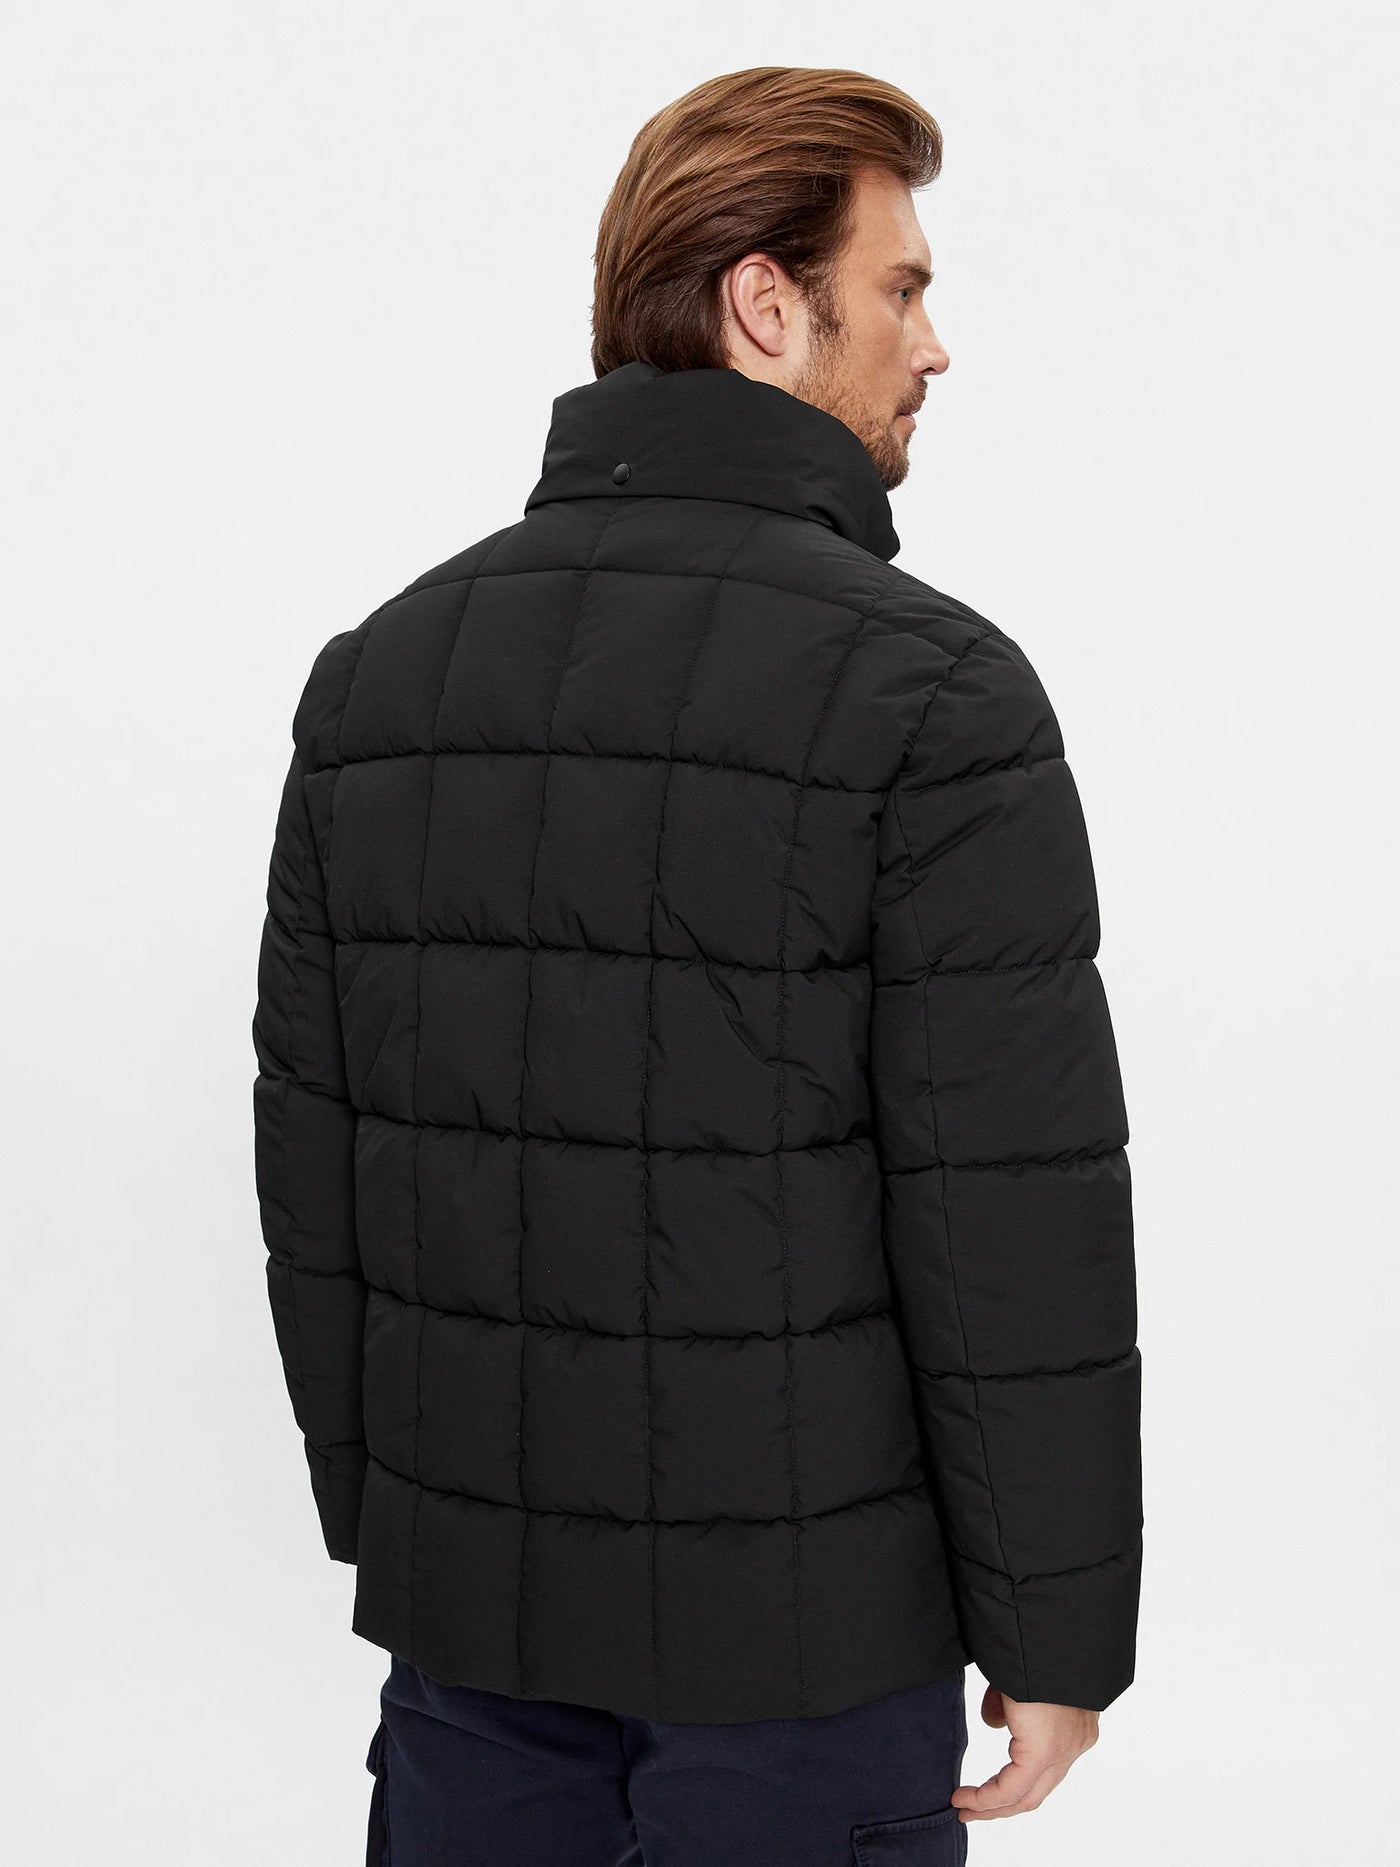 Padded jacket with removable hood